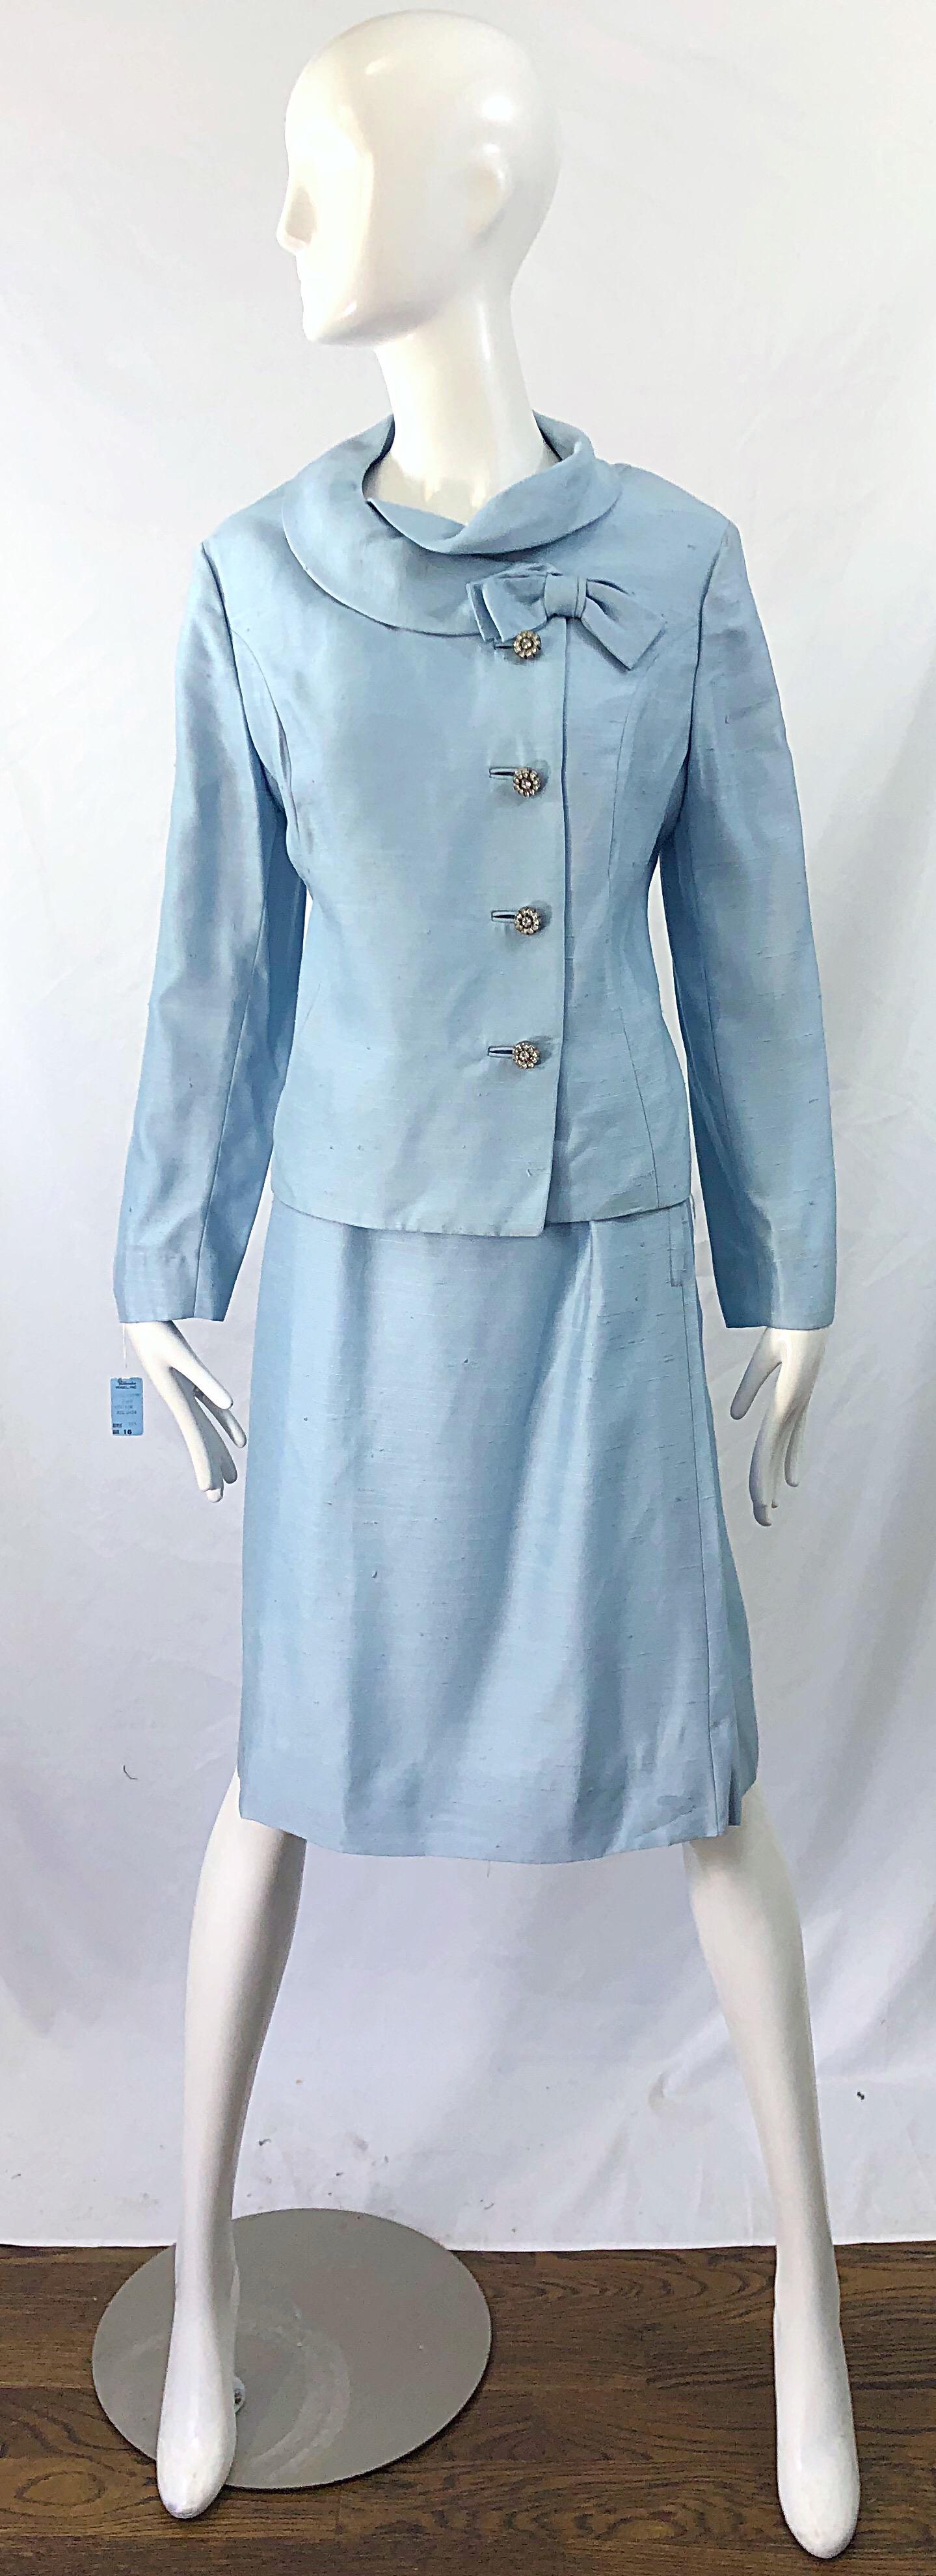 Chic deadstock ( brand new with tags ) original 1960s Alvin Handmacher ( Weathervane Tailored by Handmacher ) baby blue skirt suit ! Features a tailored jacket with pre--tied bow at left collar. Rhinestone encrusted buttons up the front. High